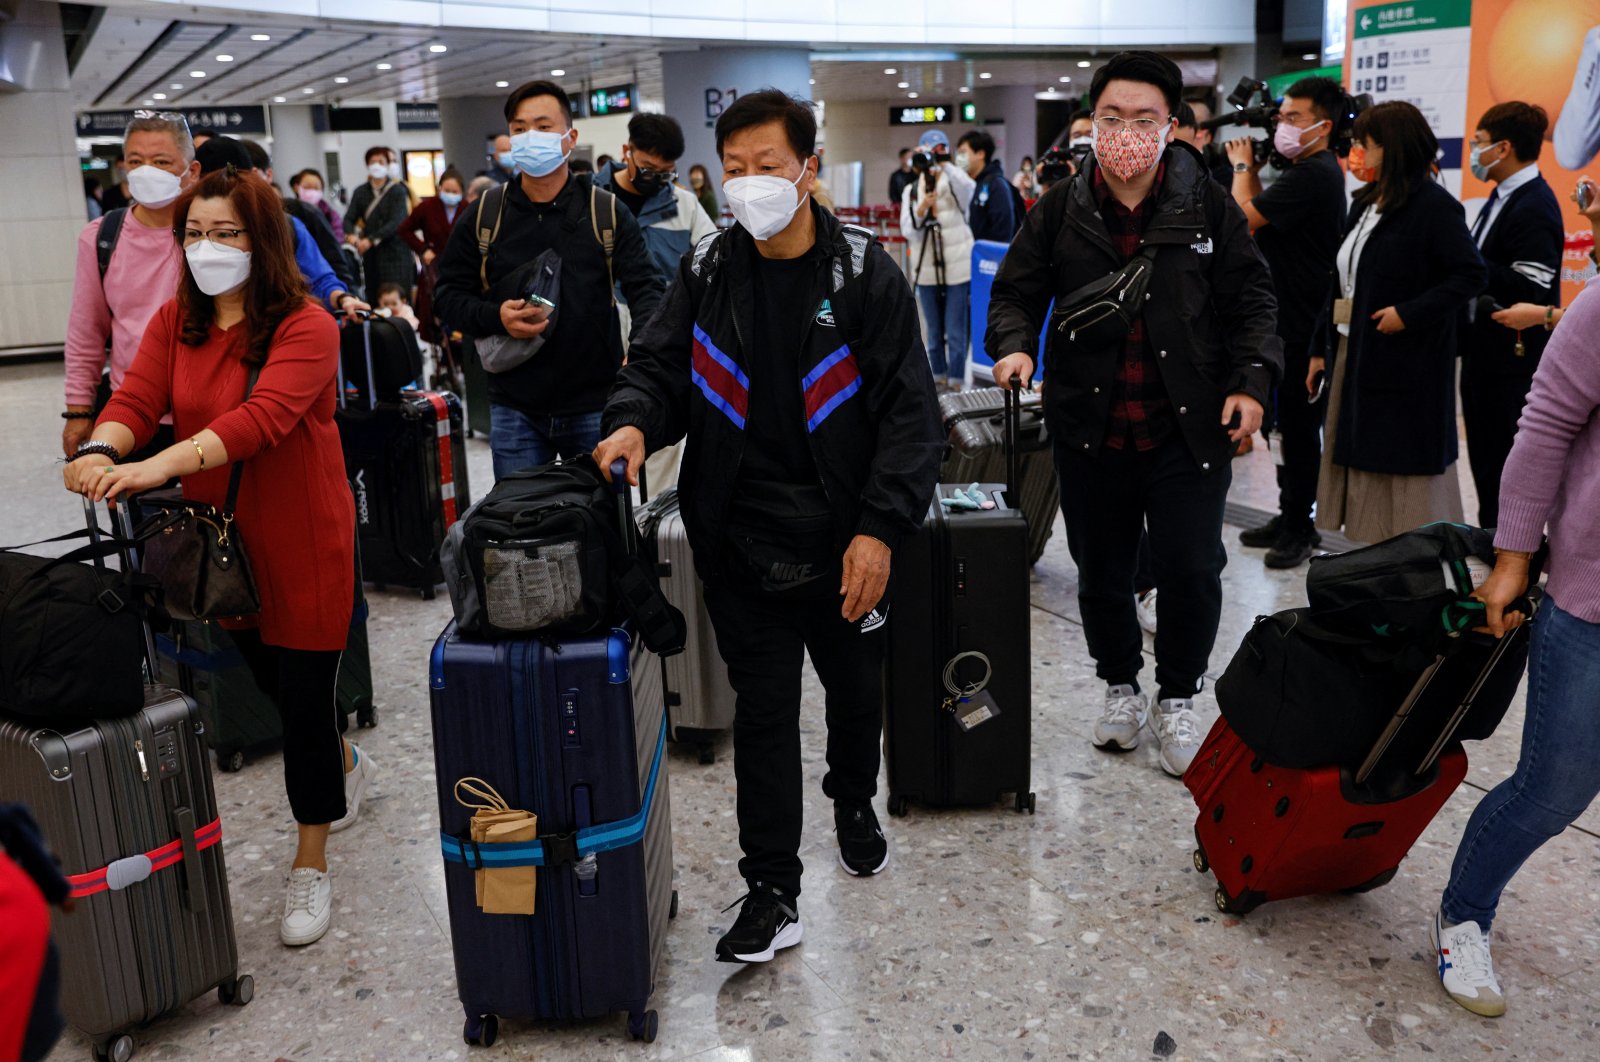 Passengers arrive at West Kowloon High-Speed Train Station Terminus on the first day of the resumption of rail service to mainland China, during the coronavirus disease (COVID-19) pandemic in Hong Kong, Jan. 15, 2023. (Reuters Photo)